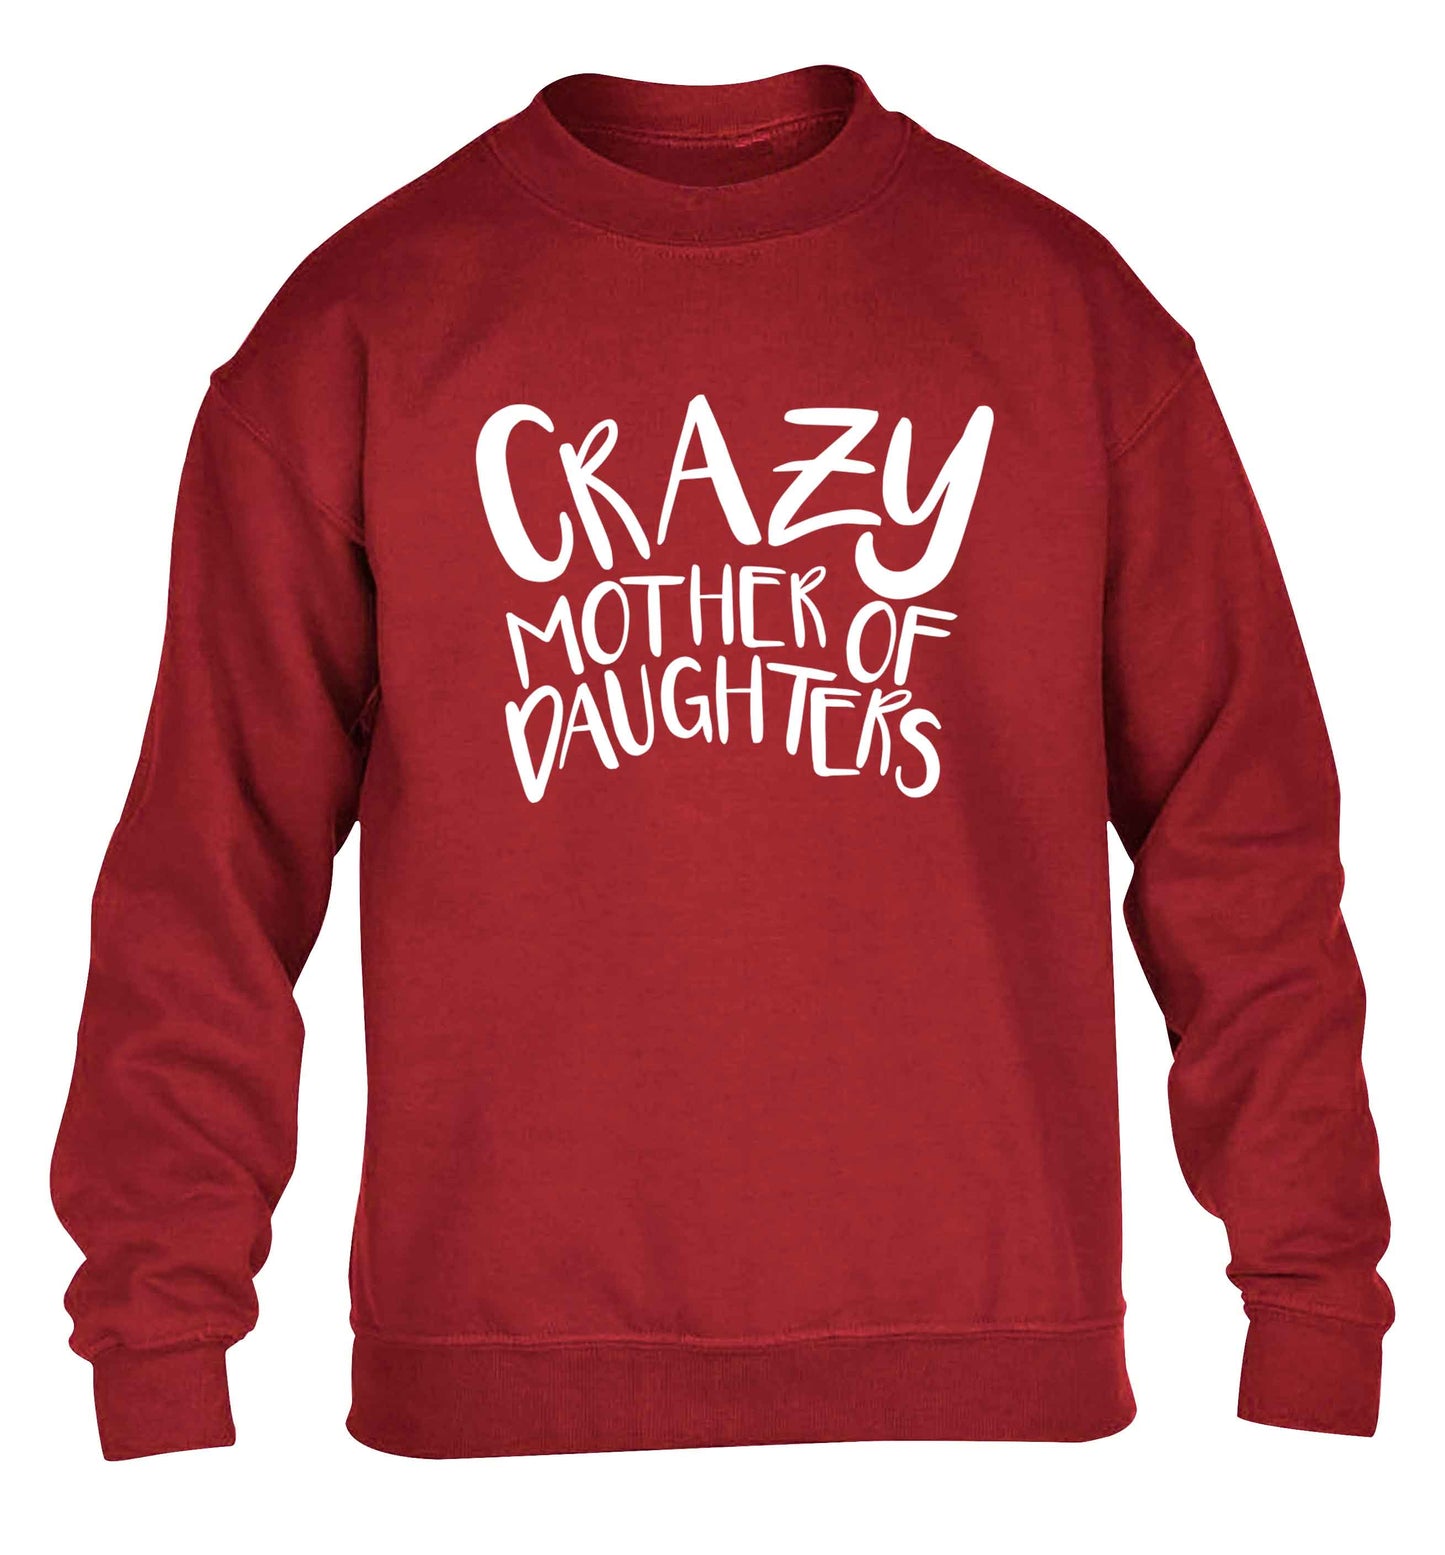 Crazy mother of daughters children's grey sweater 12-13 Years